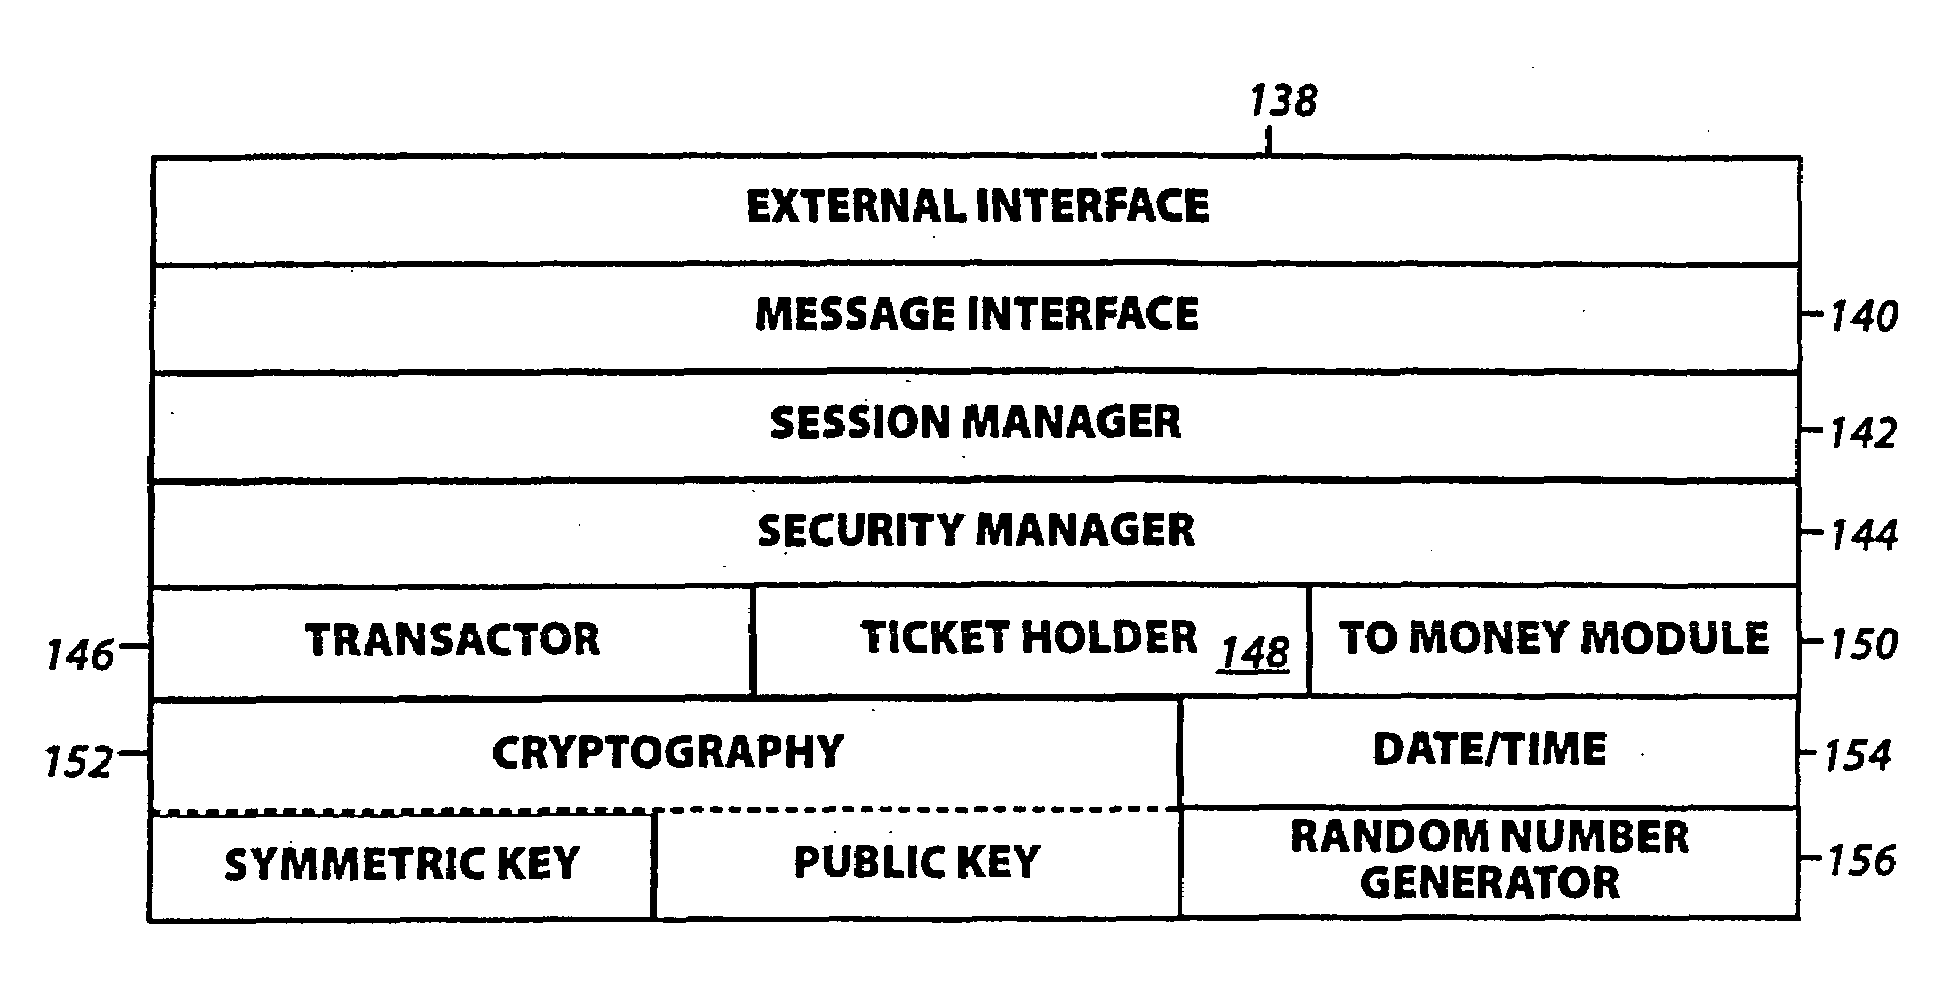 Electronic transaction apparatus for electronic commerce